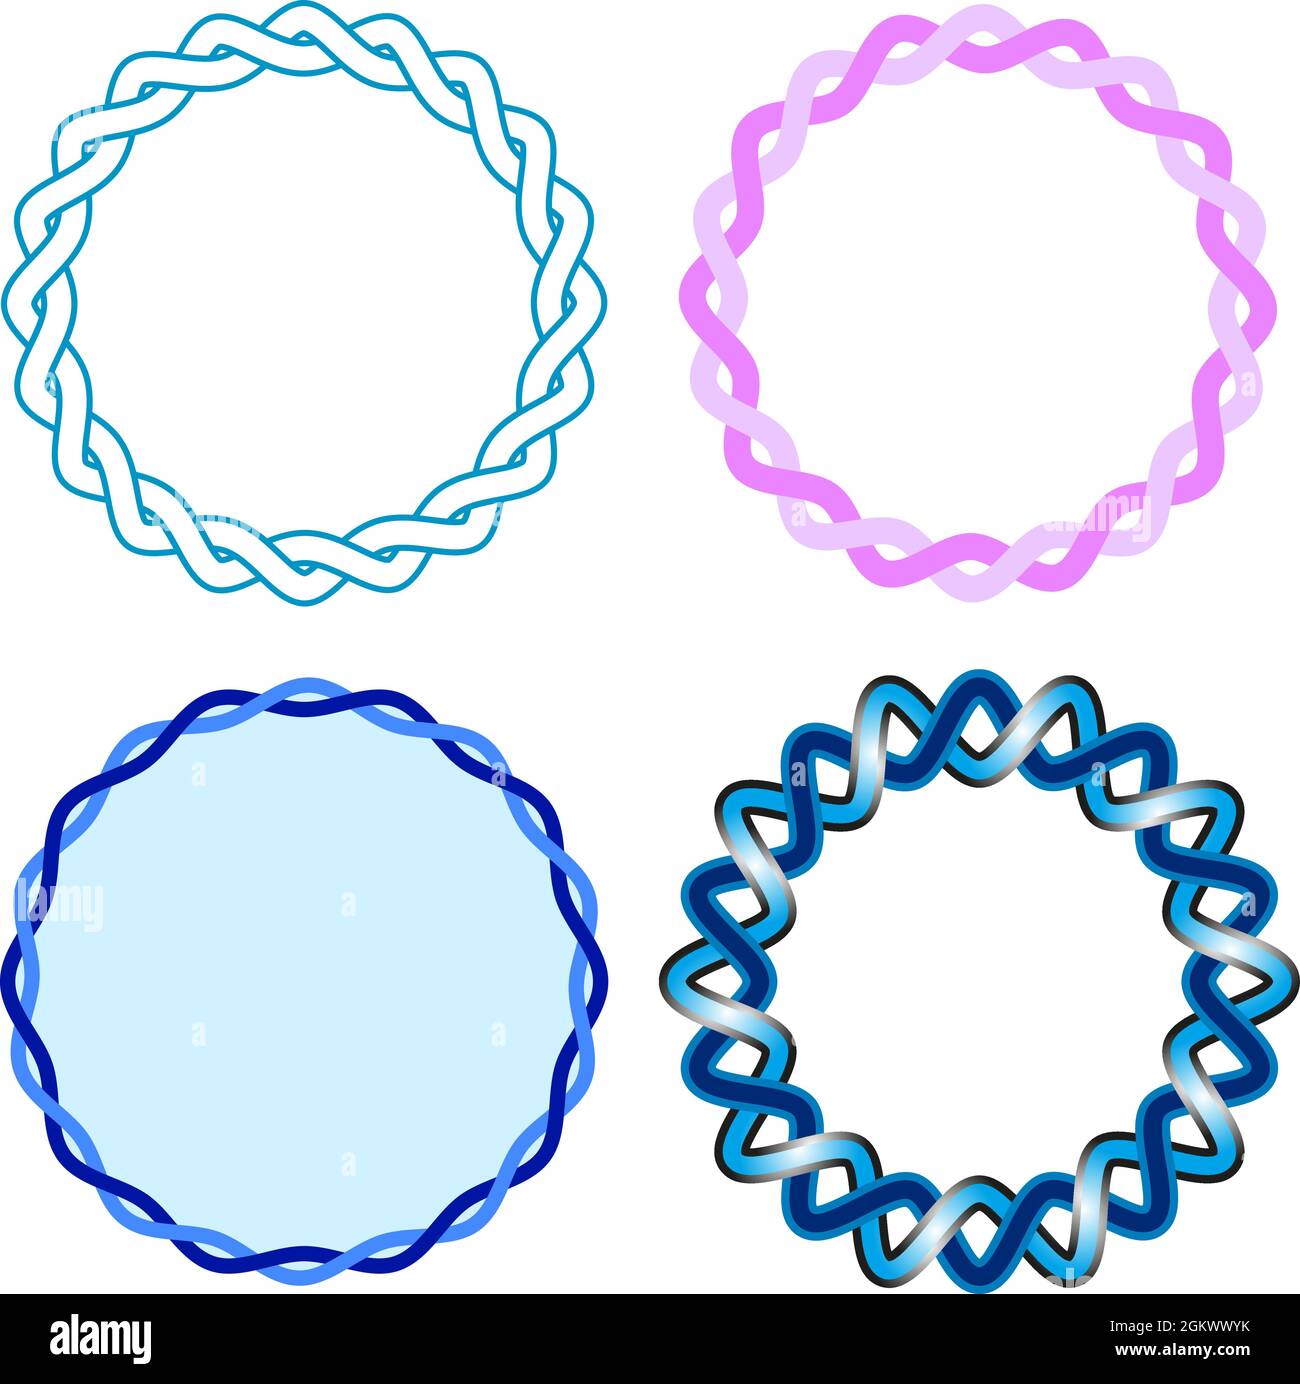 Intertwined line, circular chain, vector, illustration, computer graphic Stock Vector